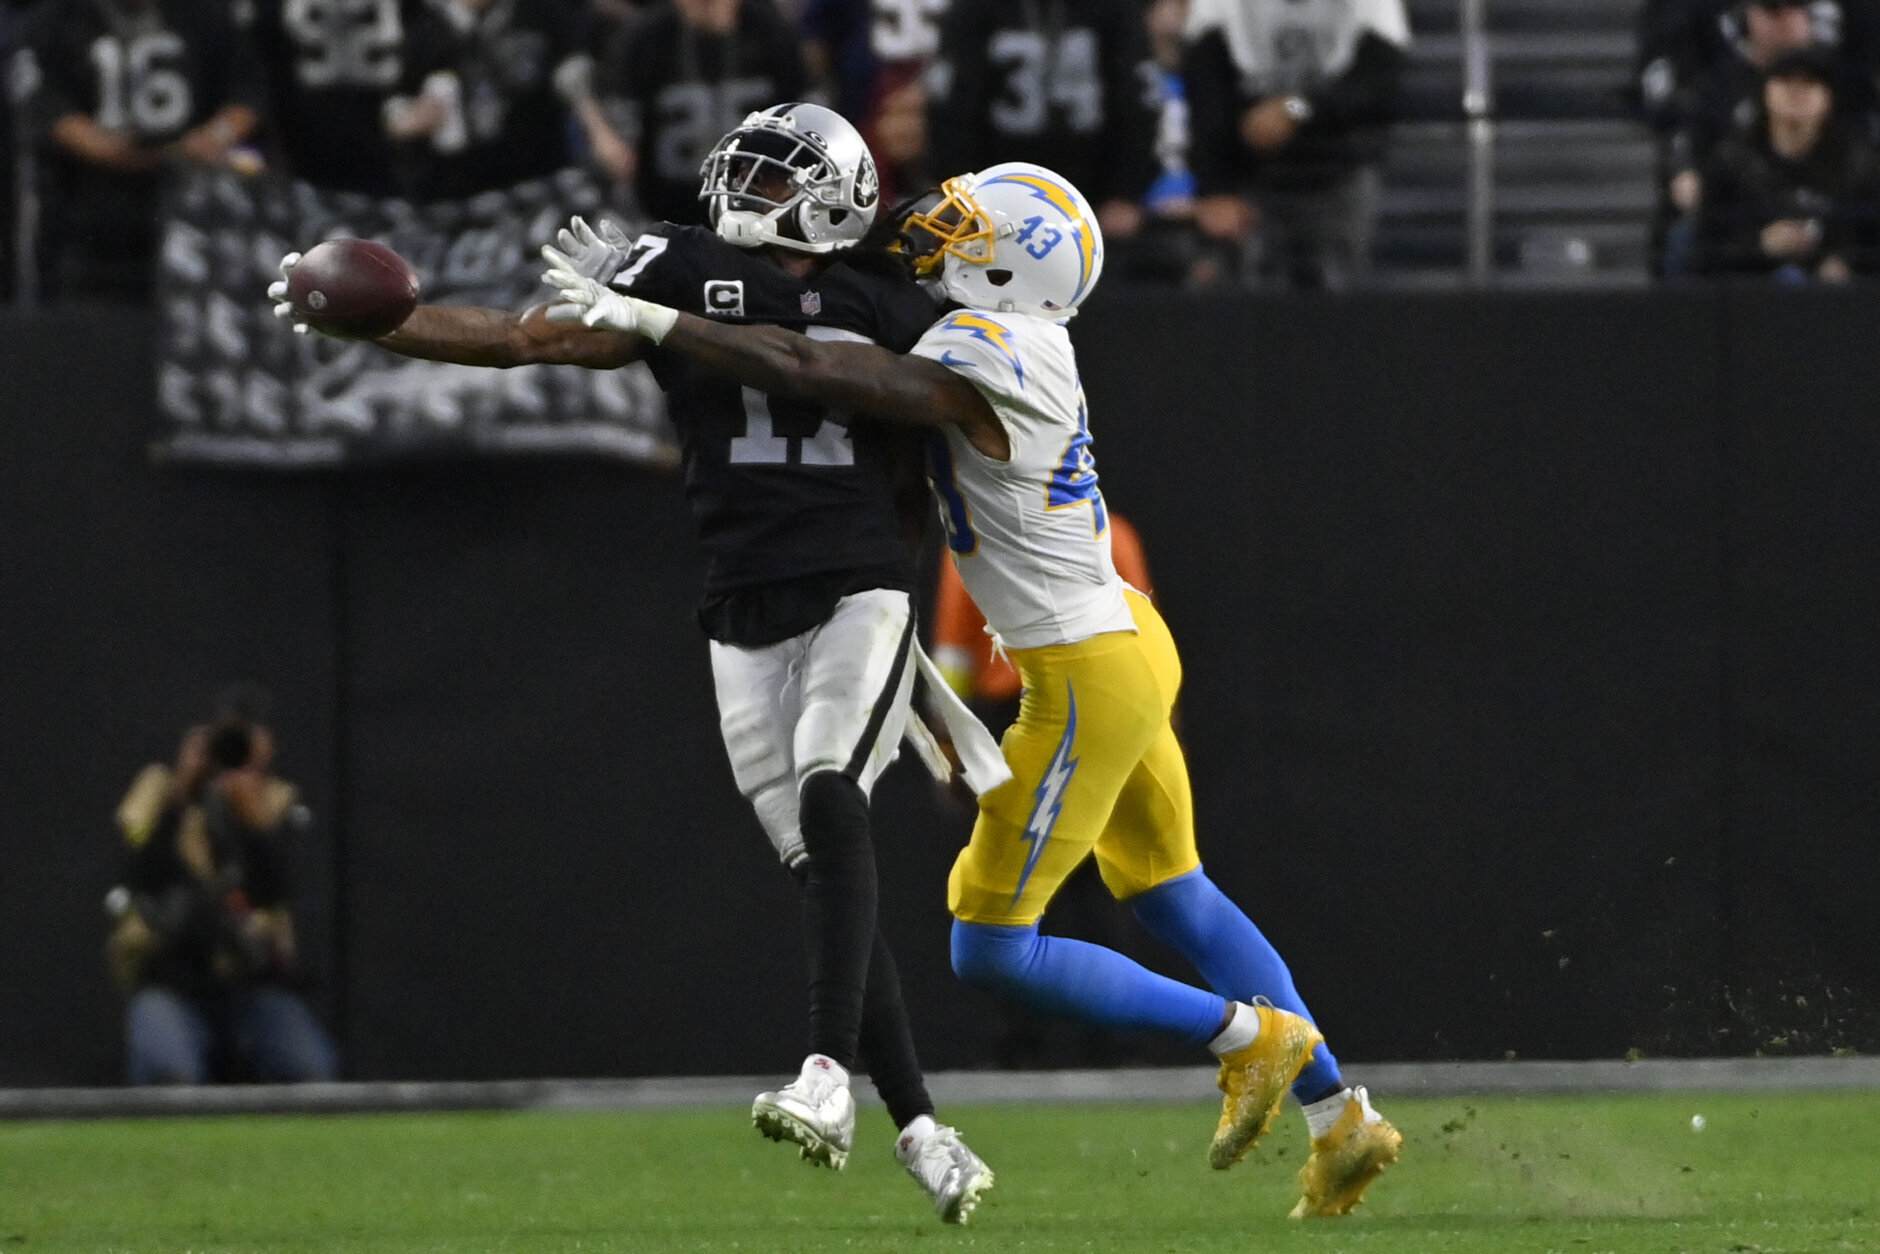 <p><em><strong>Chargers 20</strong></em><br />
<em><strong>Raiders 27</strong></em></p>
<p>Las Vegas exists to play spoiler and wreak havoc on the standings — in both fantasy and the real NFL.</p>
